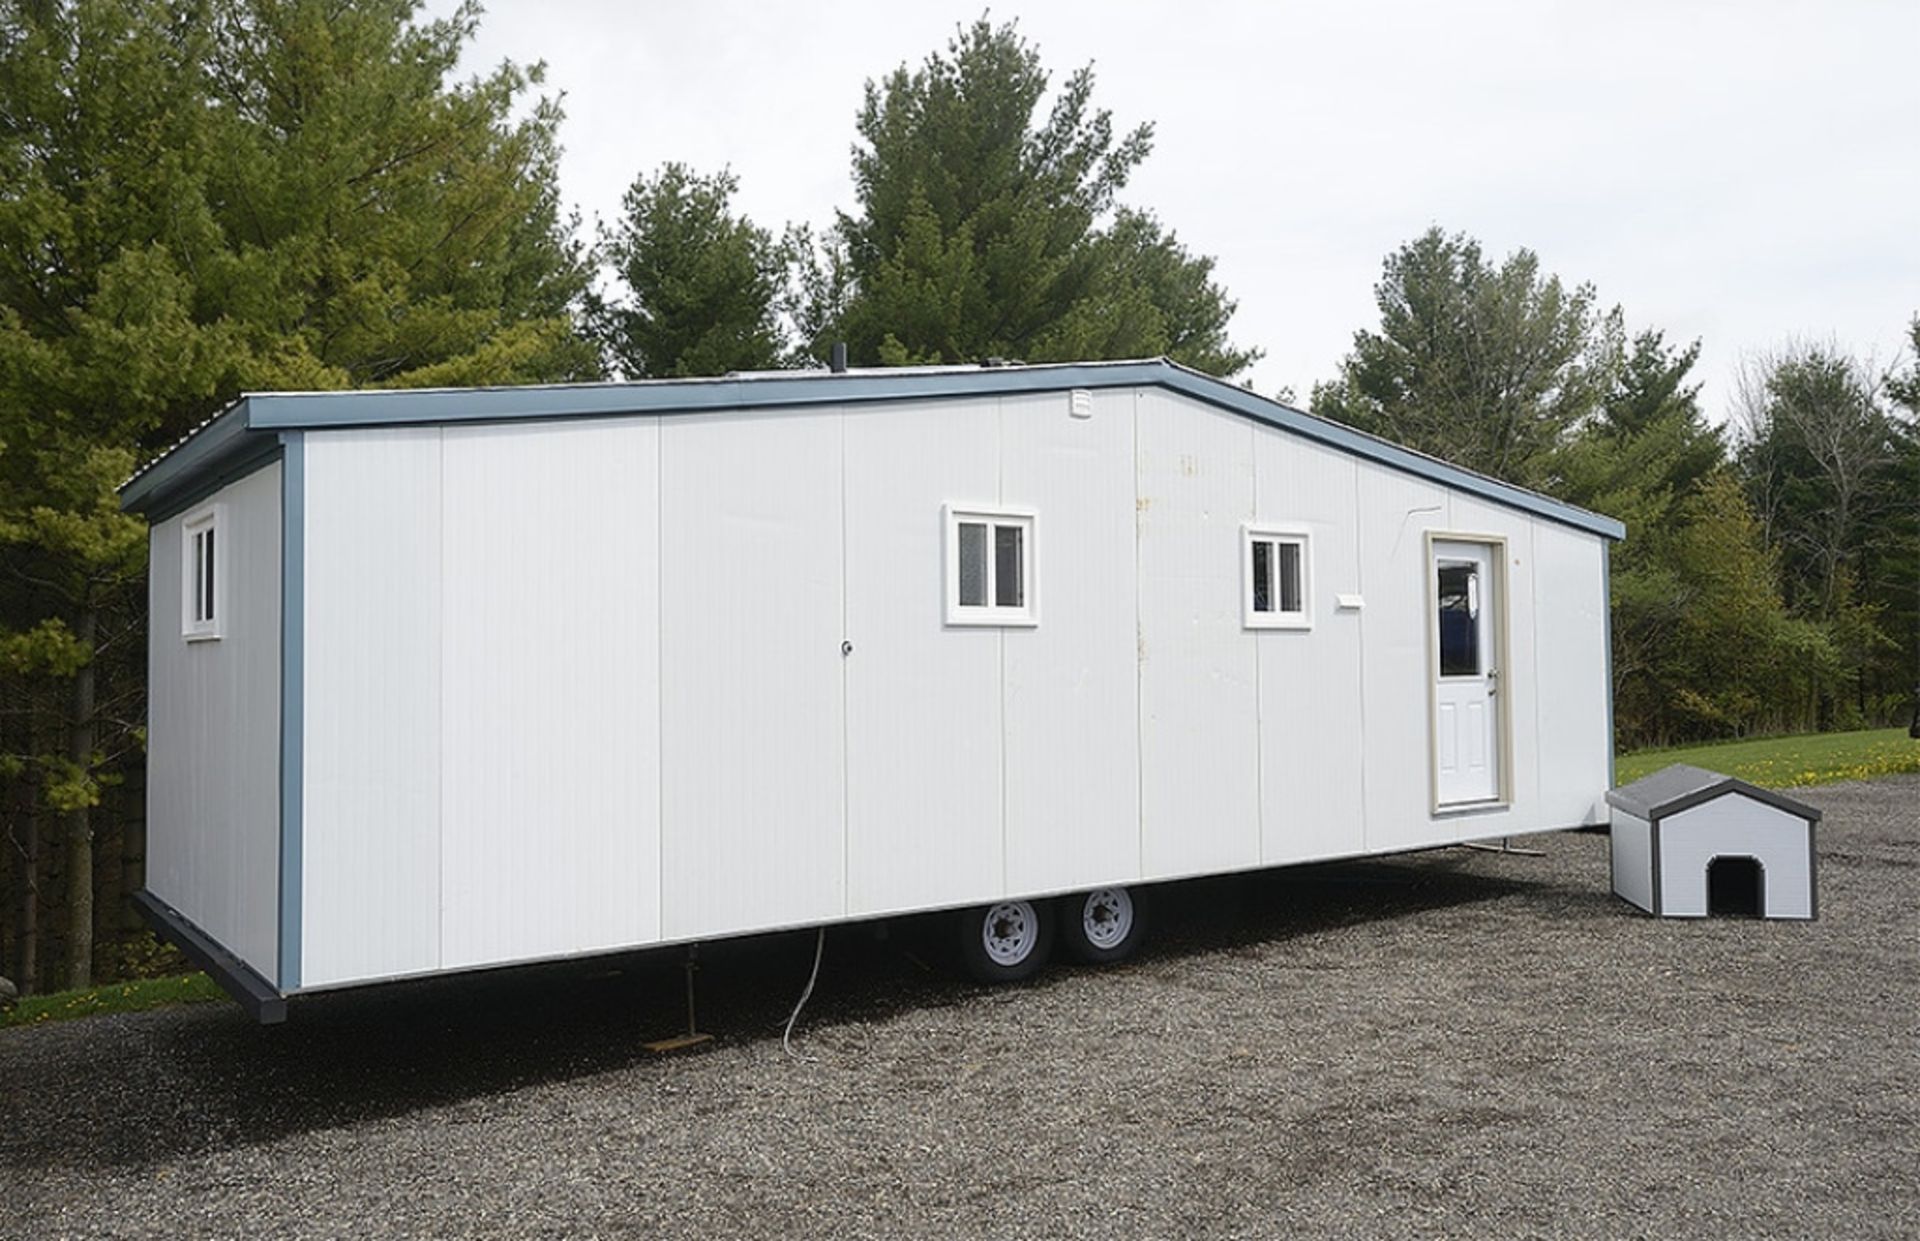 BRAND NEW 14' X 34' TIMBERSTRUC MOBILE HOME - Image 5 of 19